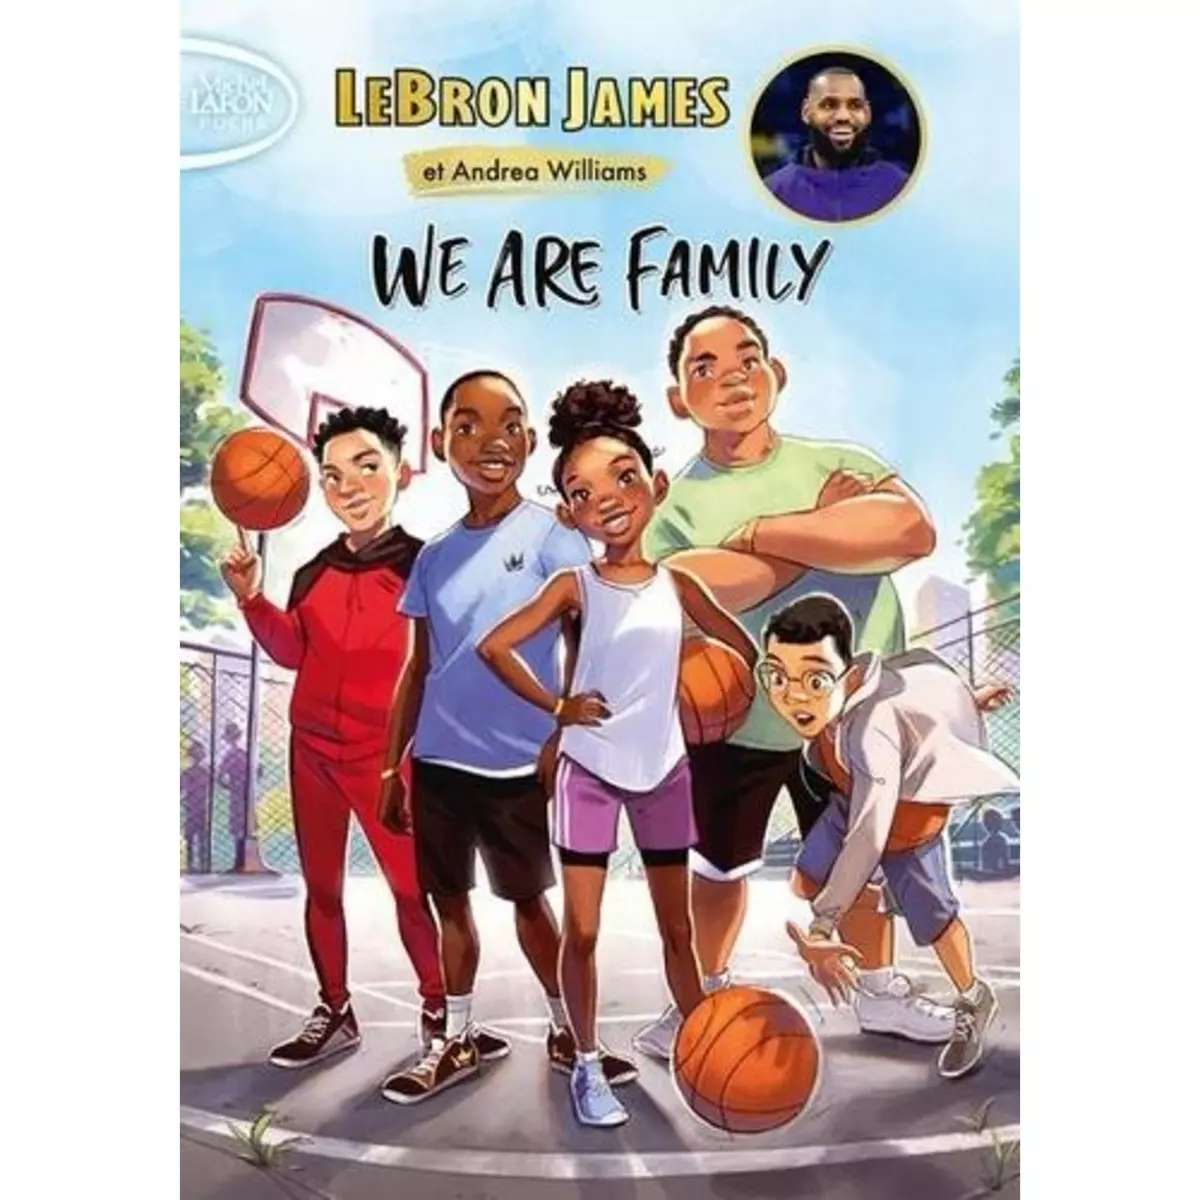  WE ARE FAMILY, James LeBron